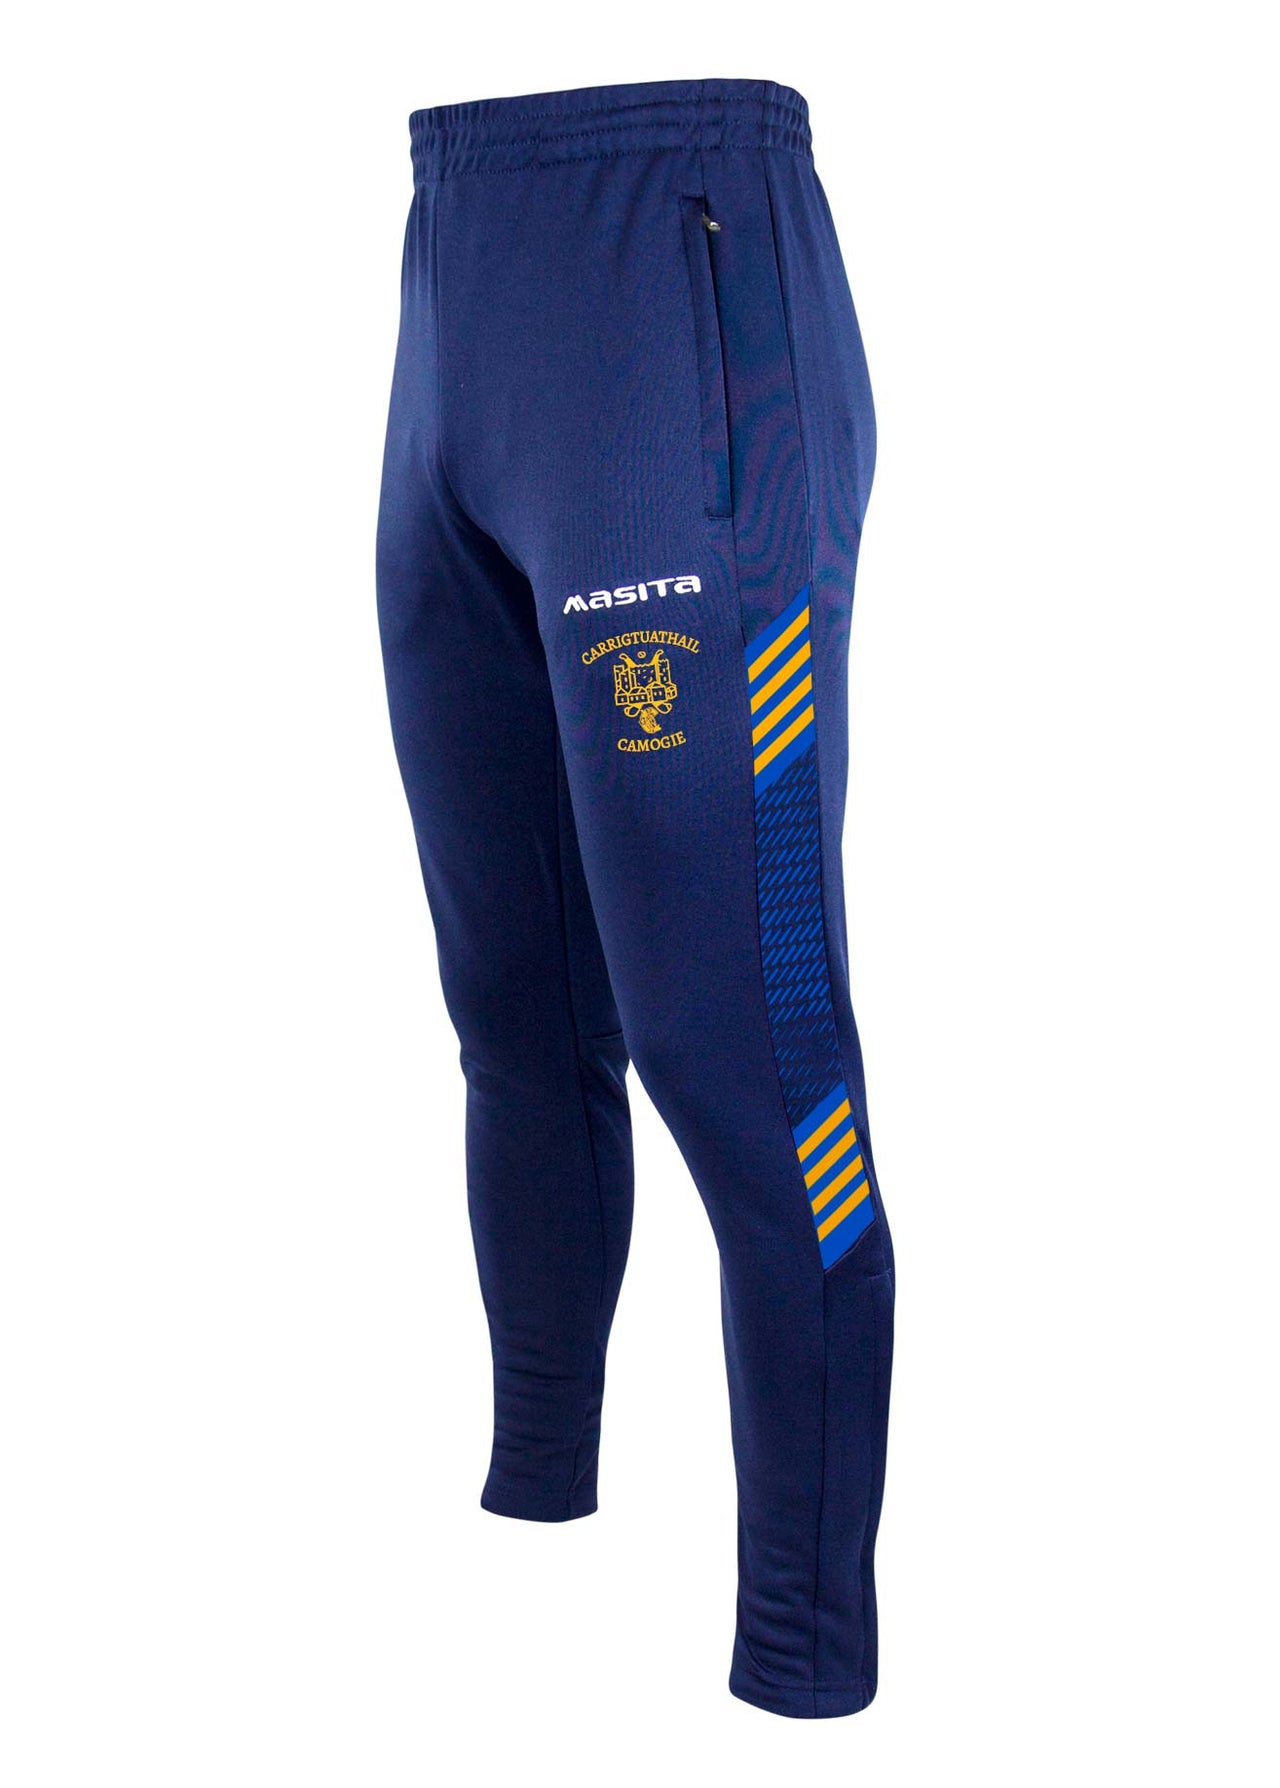 Carrigtwohill Camogie Hydro Skinny Bottoms Adults